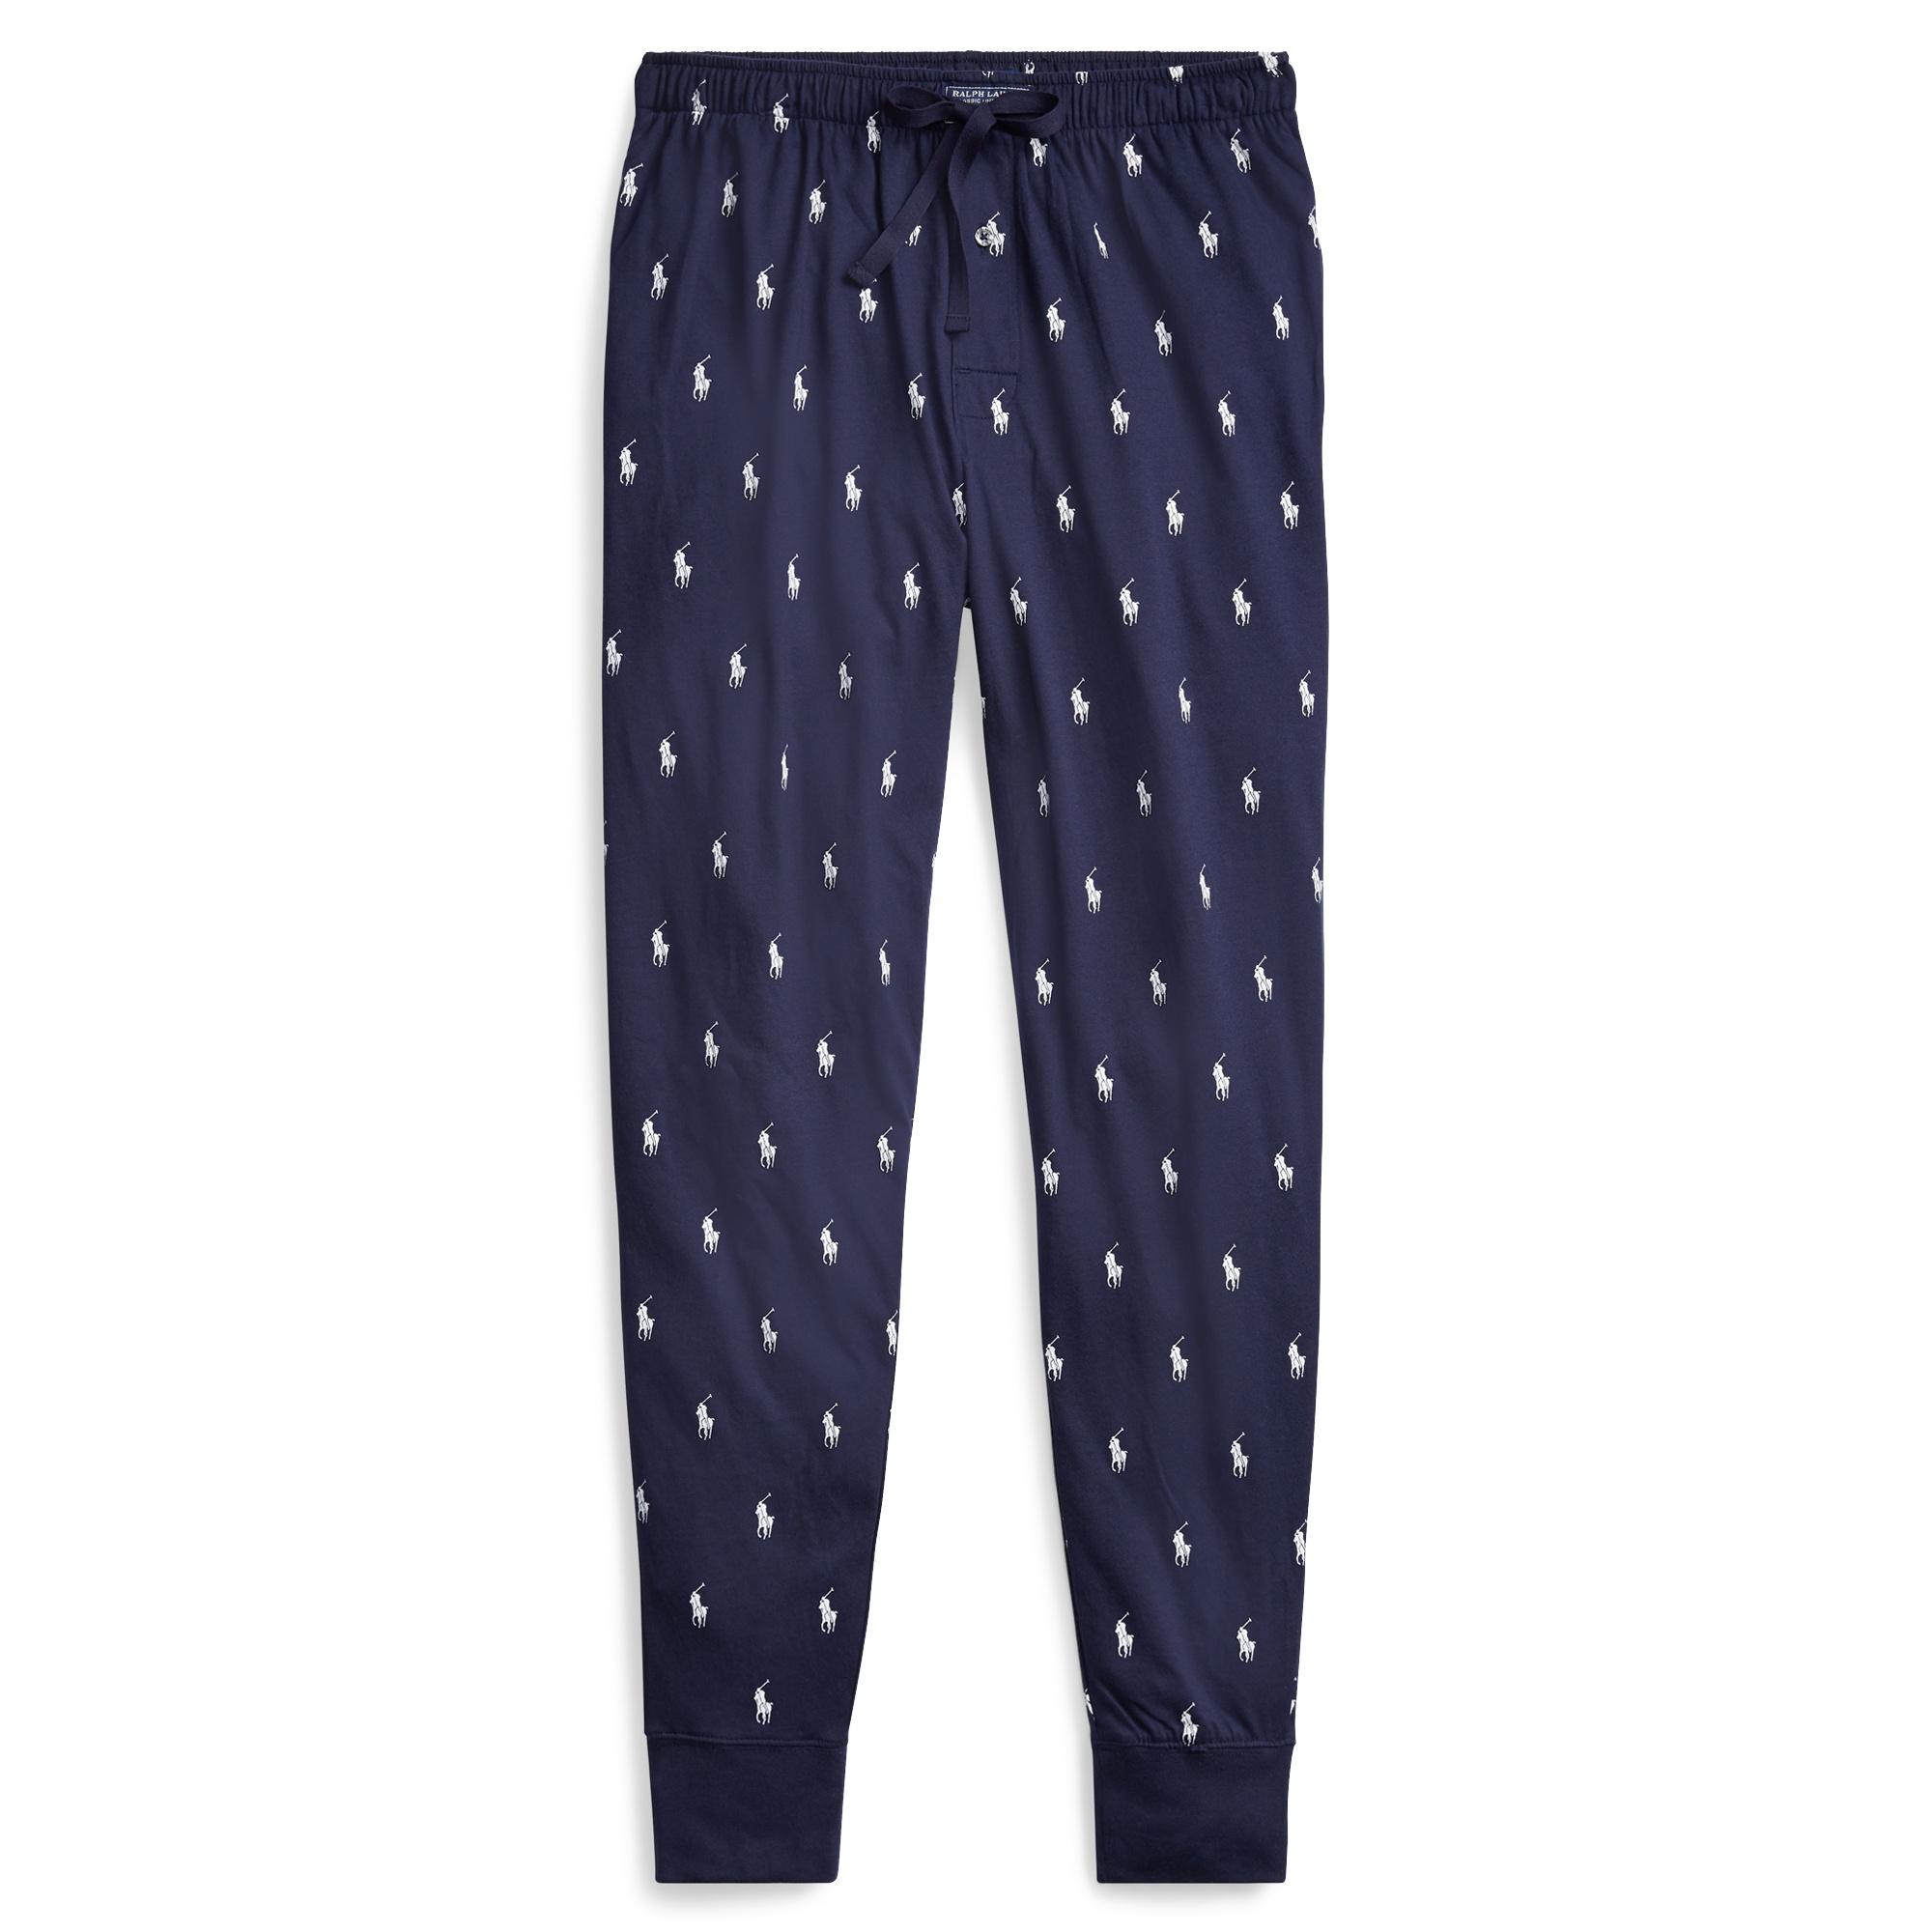 Polo Ralph Lauren Cotton Pony Print Pajama Jogger Pants in Navy (Blue) for  Men - Save 60% | Lyst